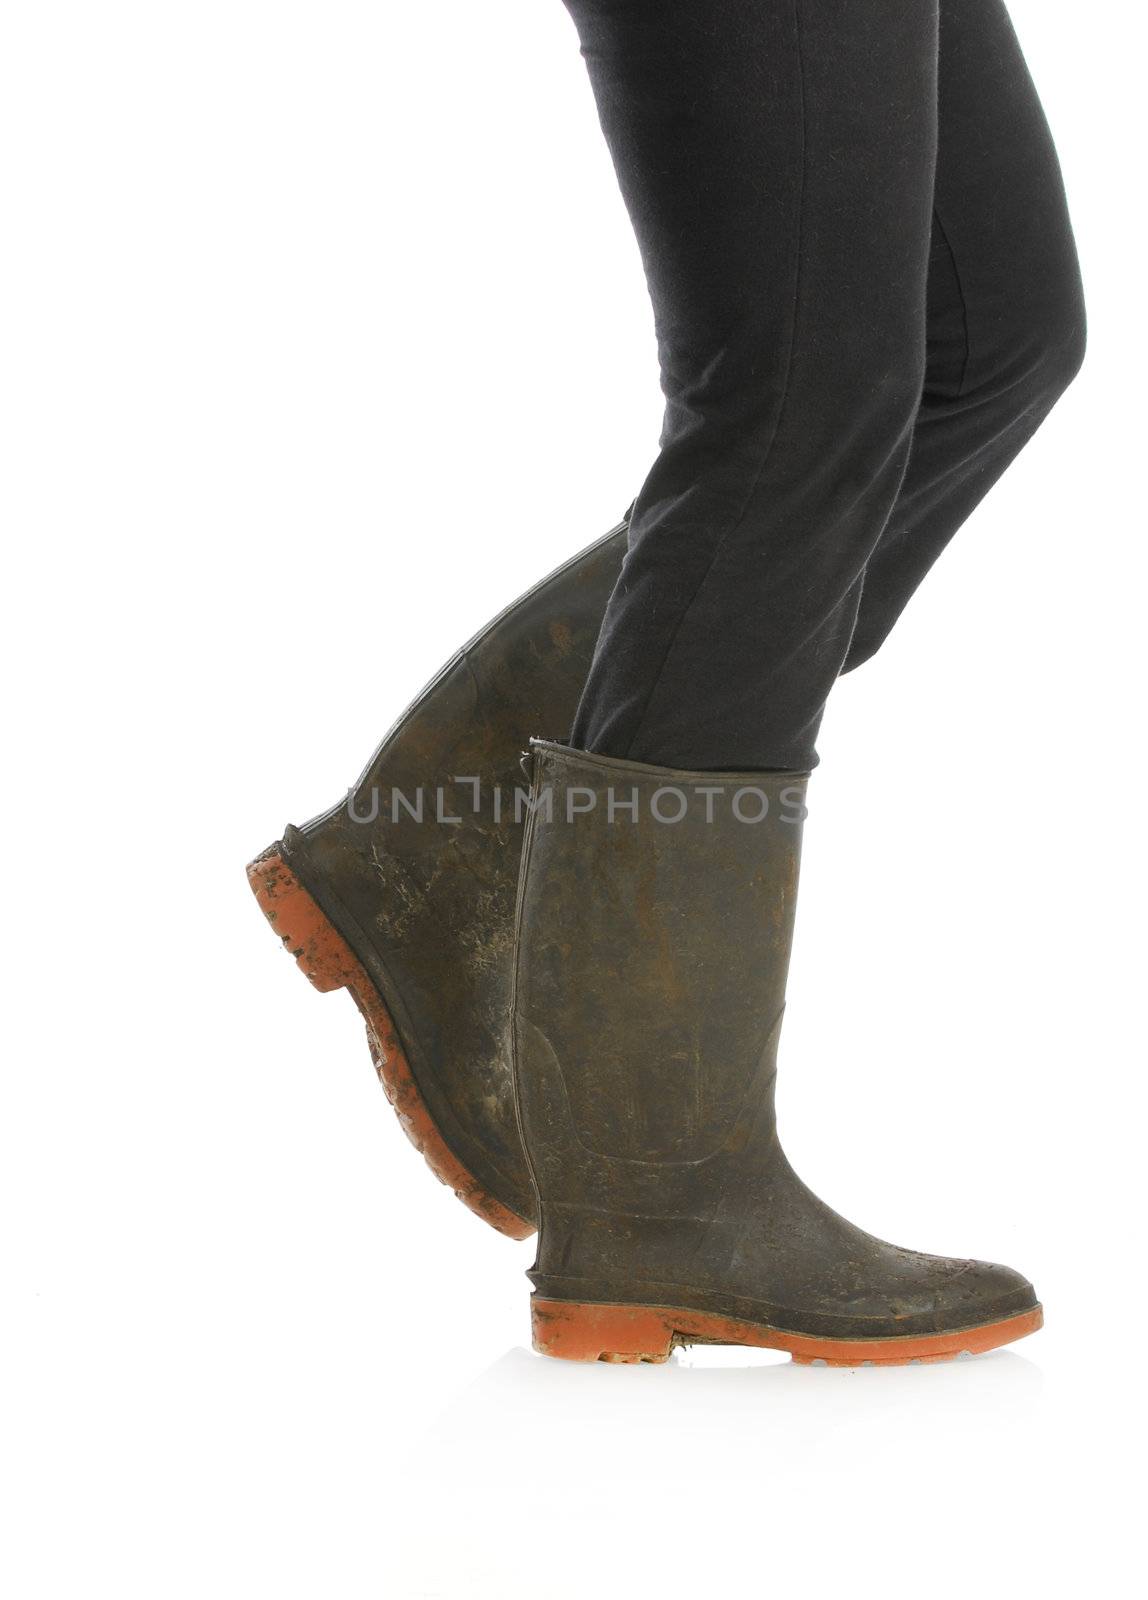 muddy boots - woman walking with muddy boots on white background